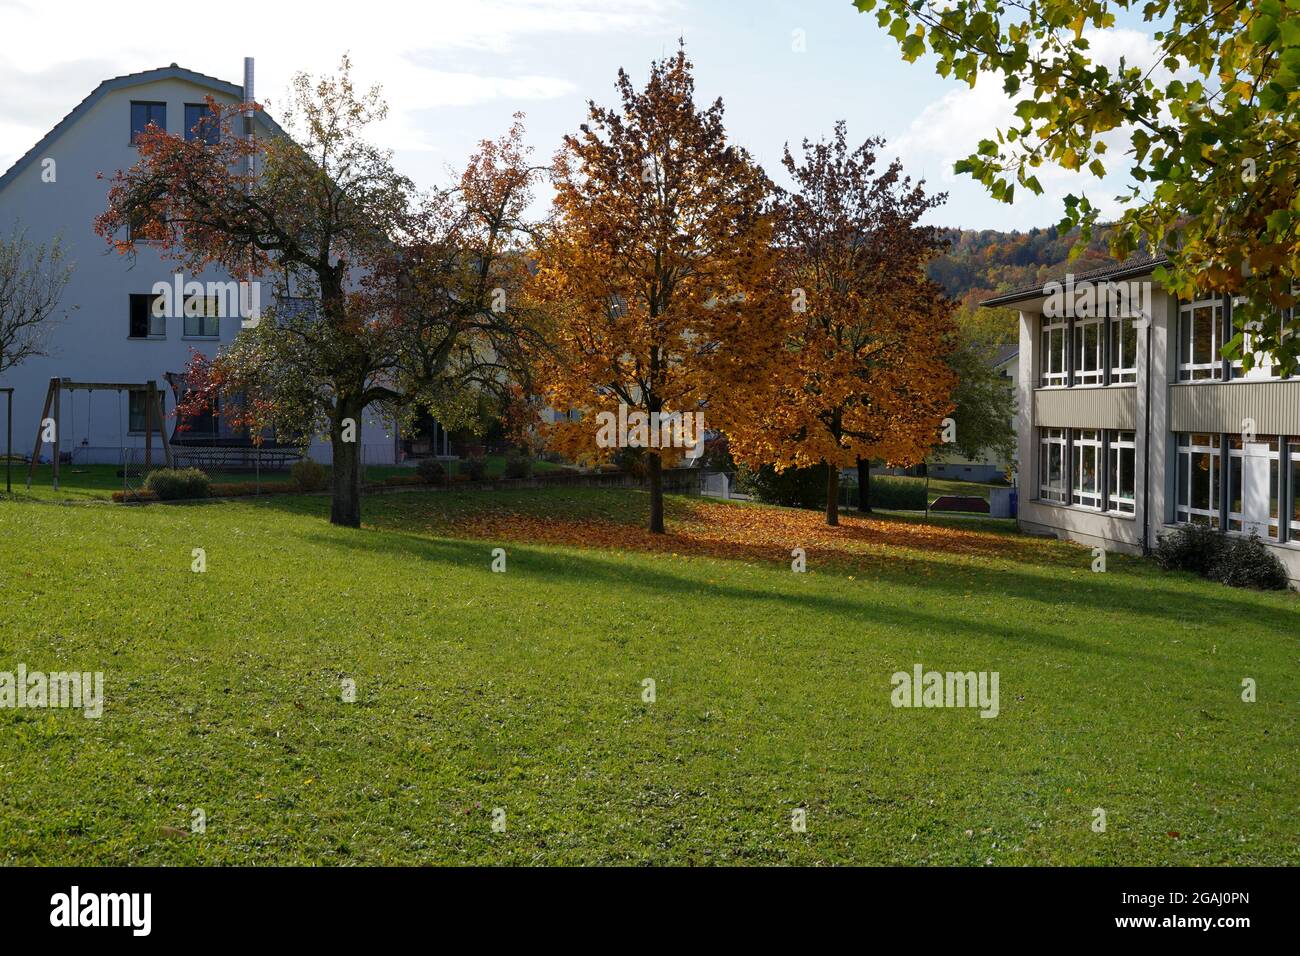 Rural scene in autumn. Residential building and school with colorful autumn trees in the background. In the foreground there is green lawn. Stock Photo